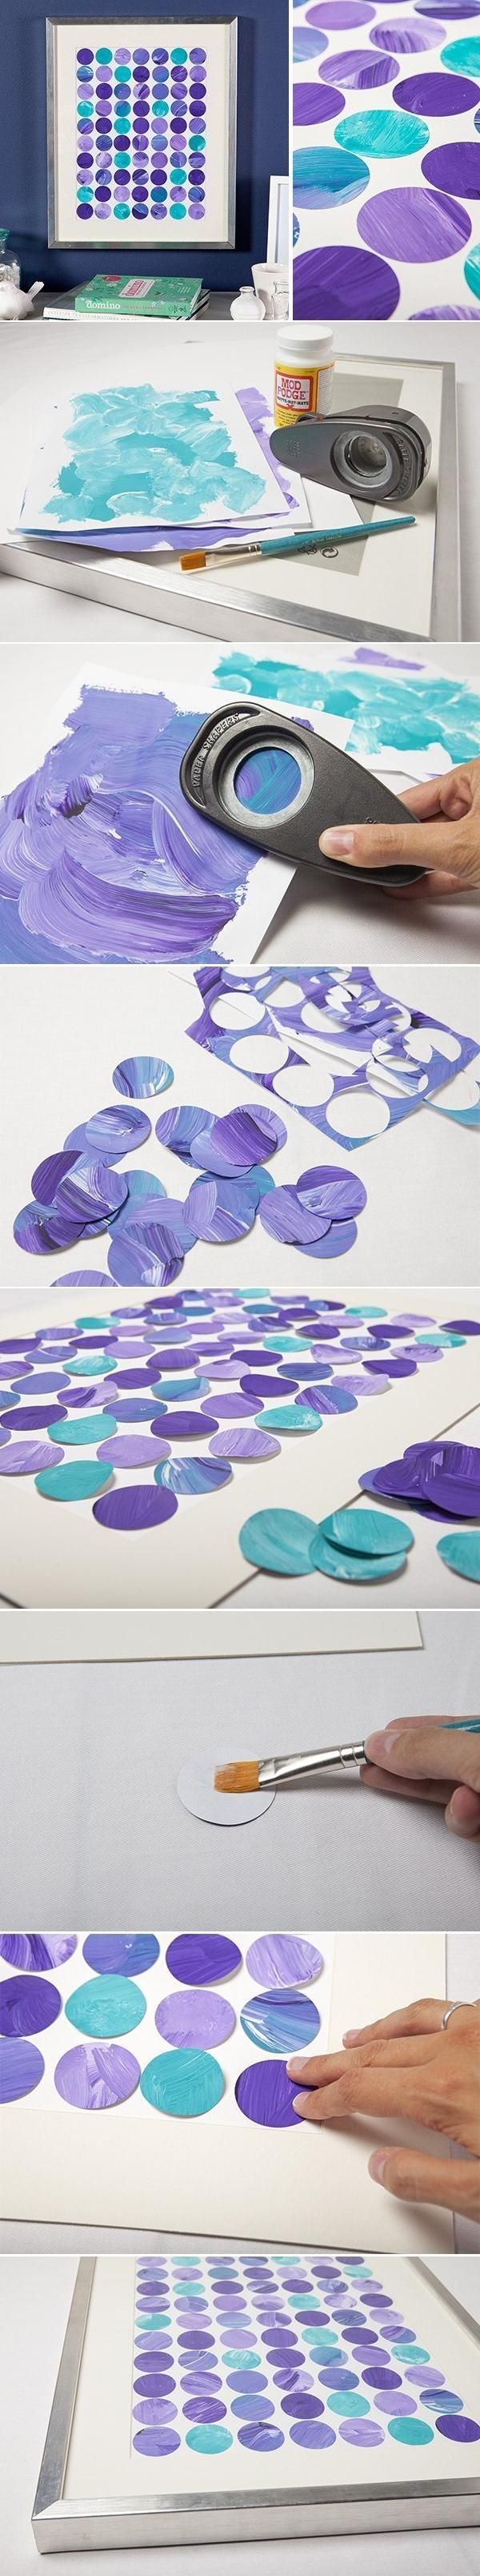 DIY Colorful Art – Would be a great idea to get the kids to paint several sheets of paper then use them for the cut-outs!